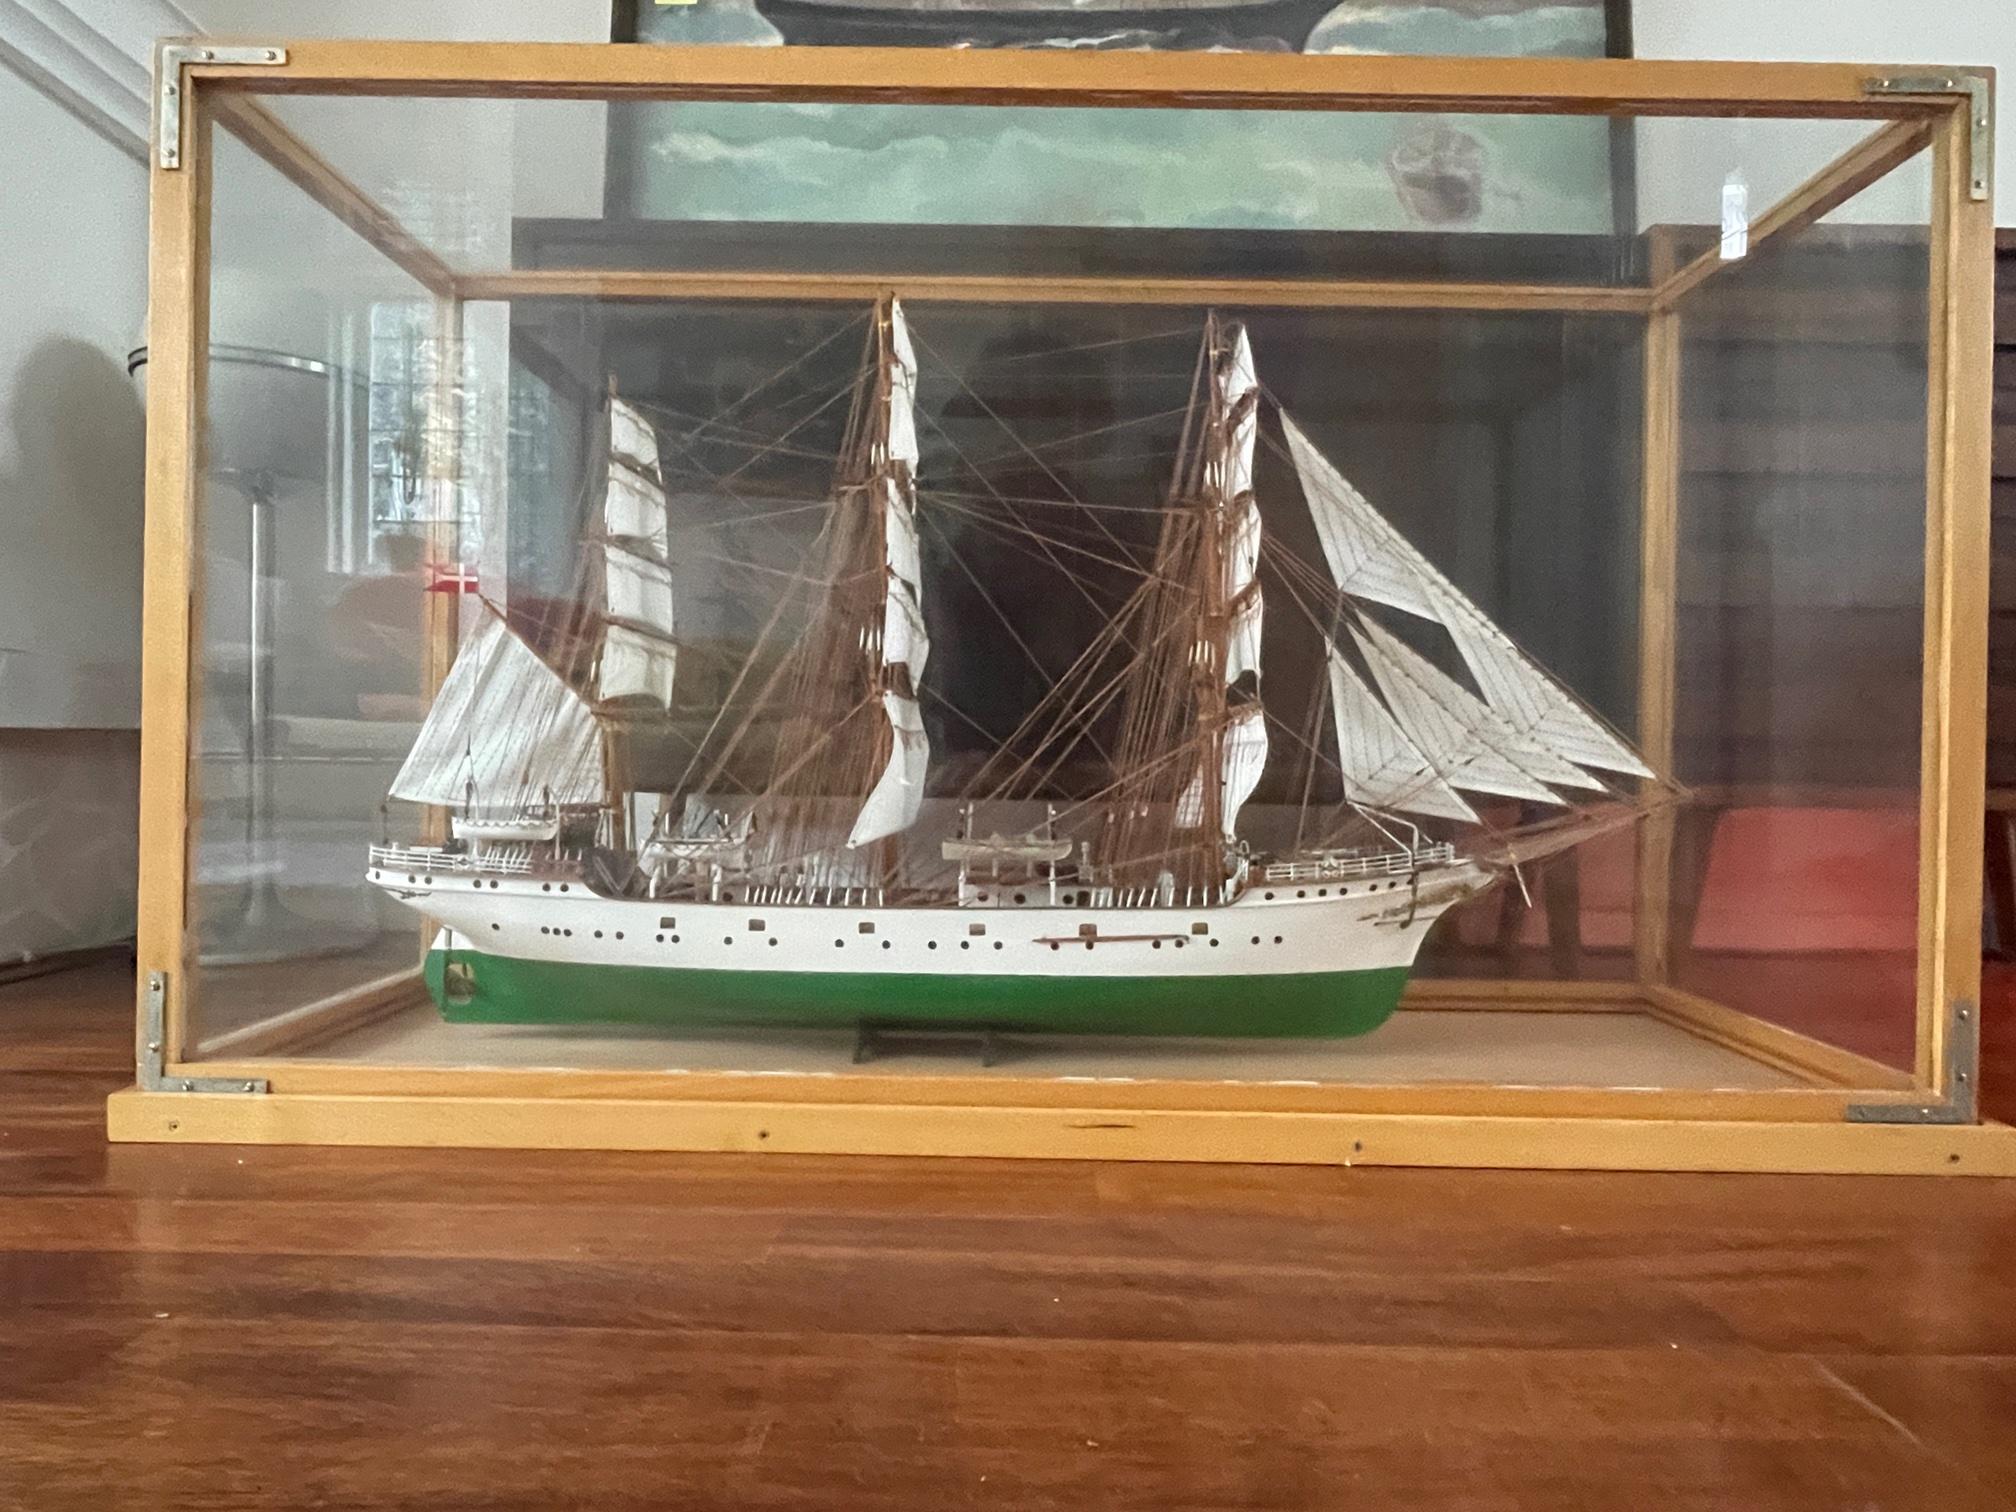 What. A. Stunner! This item is a must ghave for every collector of nautical items. Or for everyone who loves to have an eyecatcher in the livingroom, office, shop, bar, restaurant or boathouse.

The Naval Training Ship DANMARK is a steel-hulled,